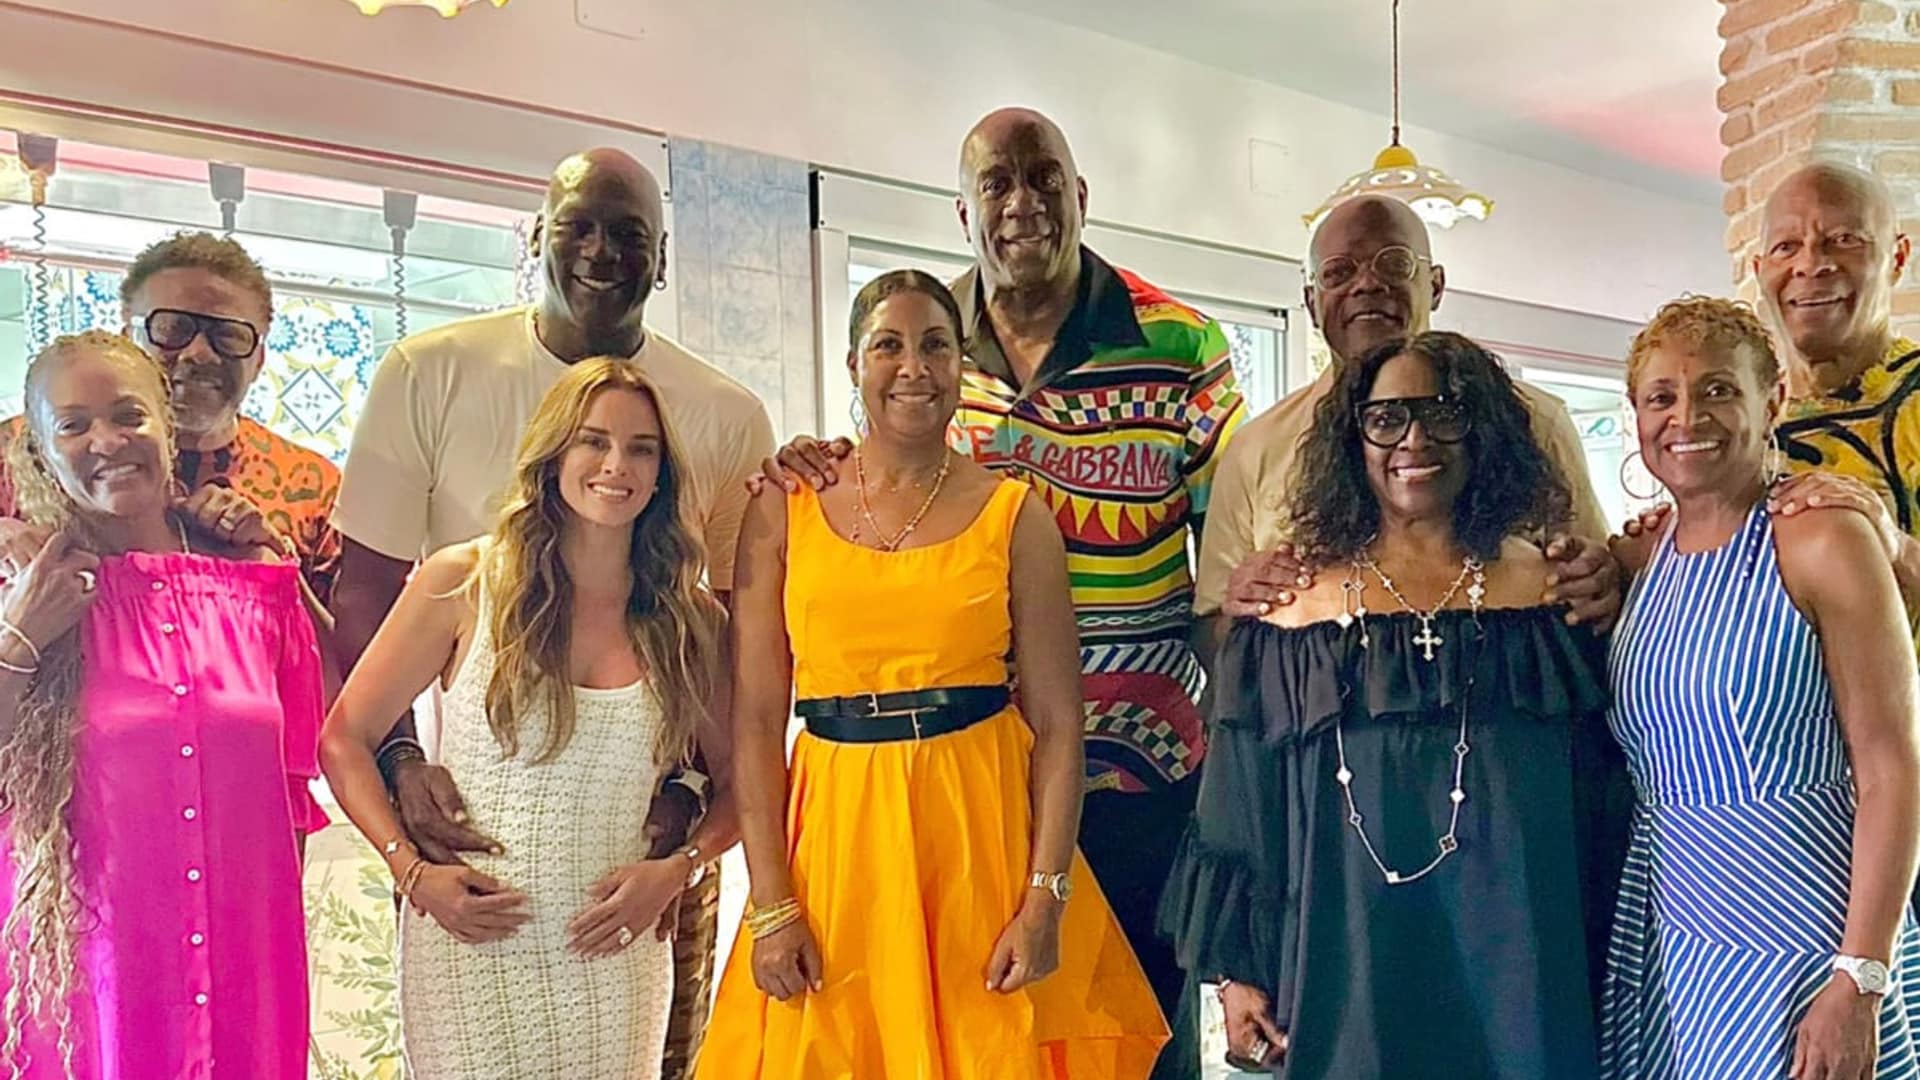 Michael Jordan and Yvette Prieto join Magic Johnson and Samuel L. Jackson on a family sing-along in Italy